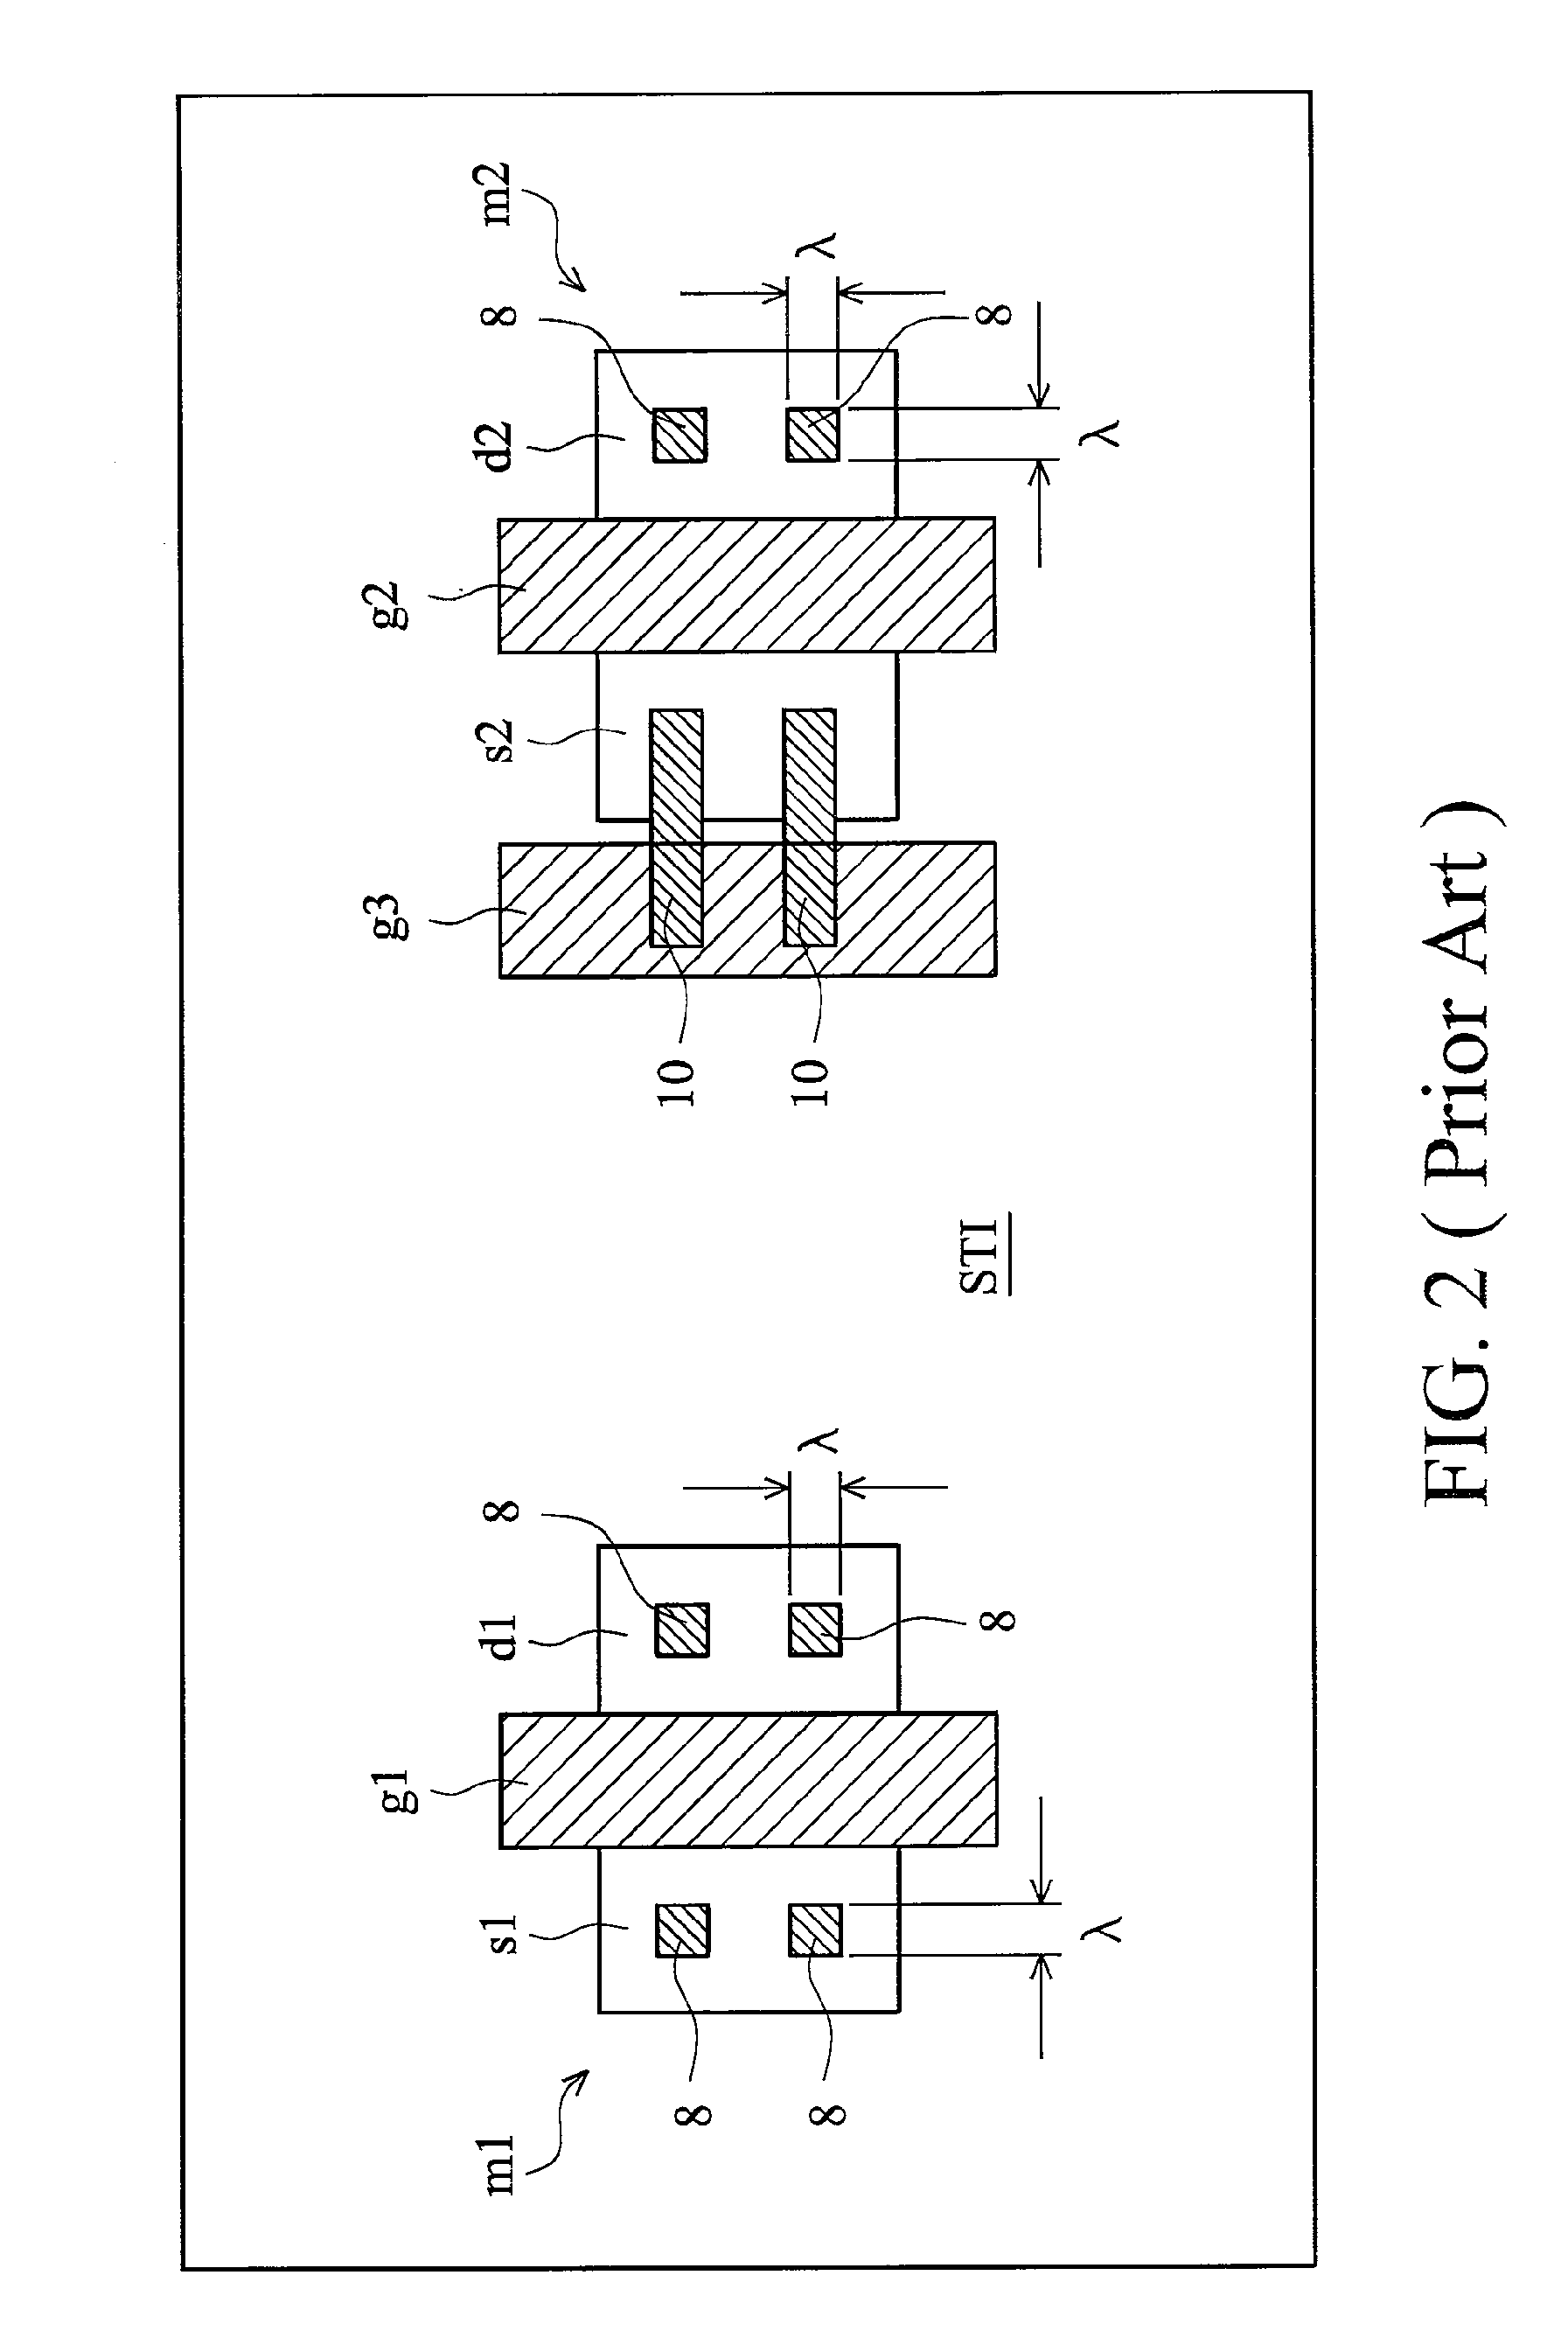 Semiconductor Device with Improved Contact Structure and Method of Forming Same